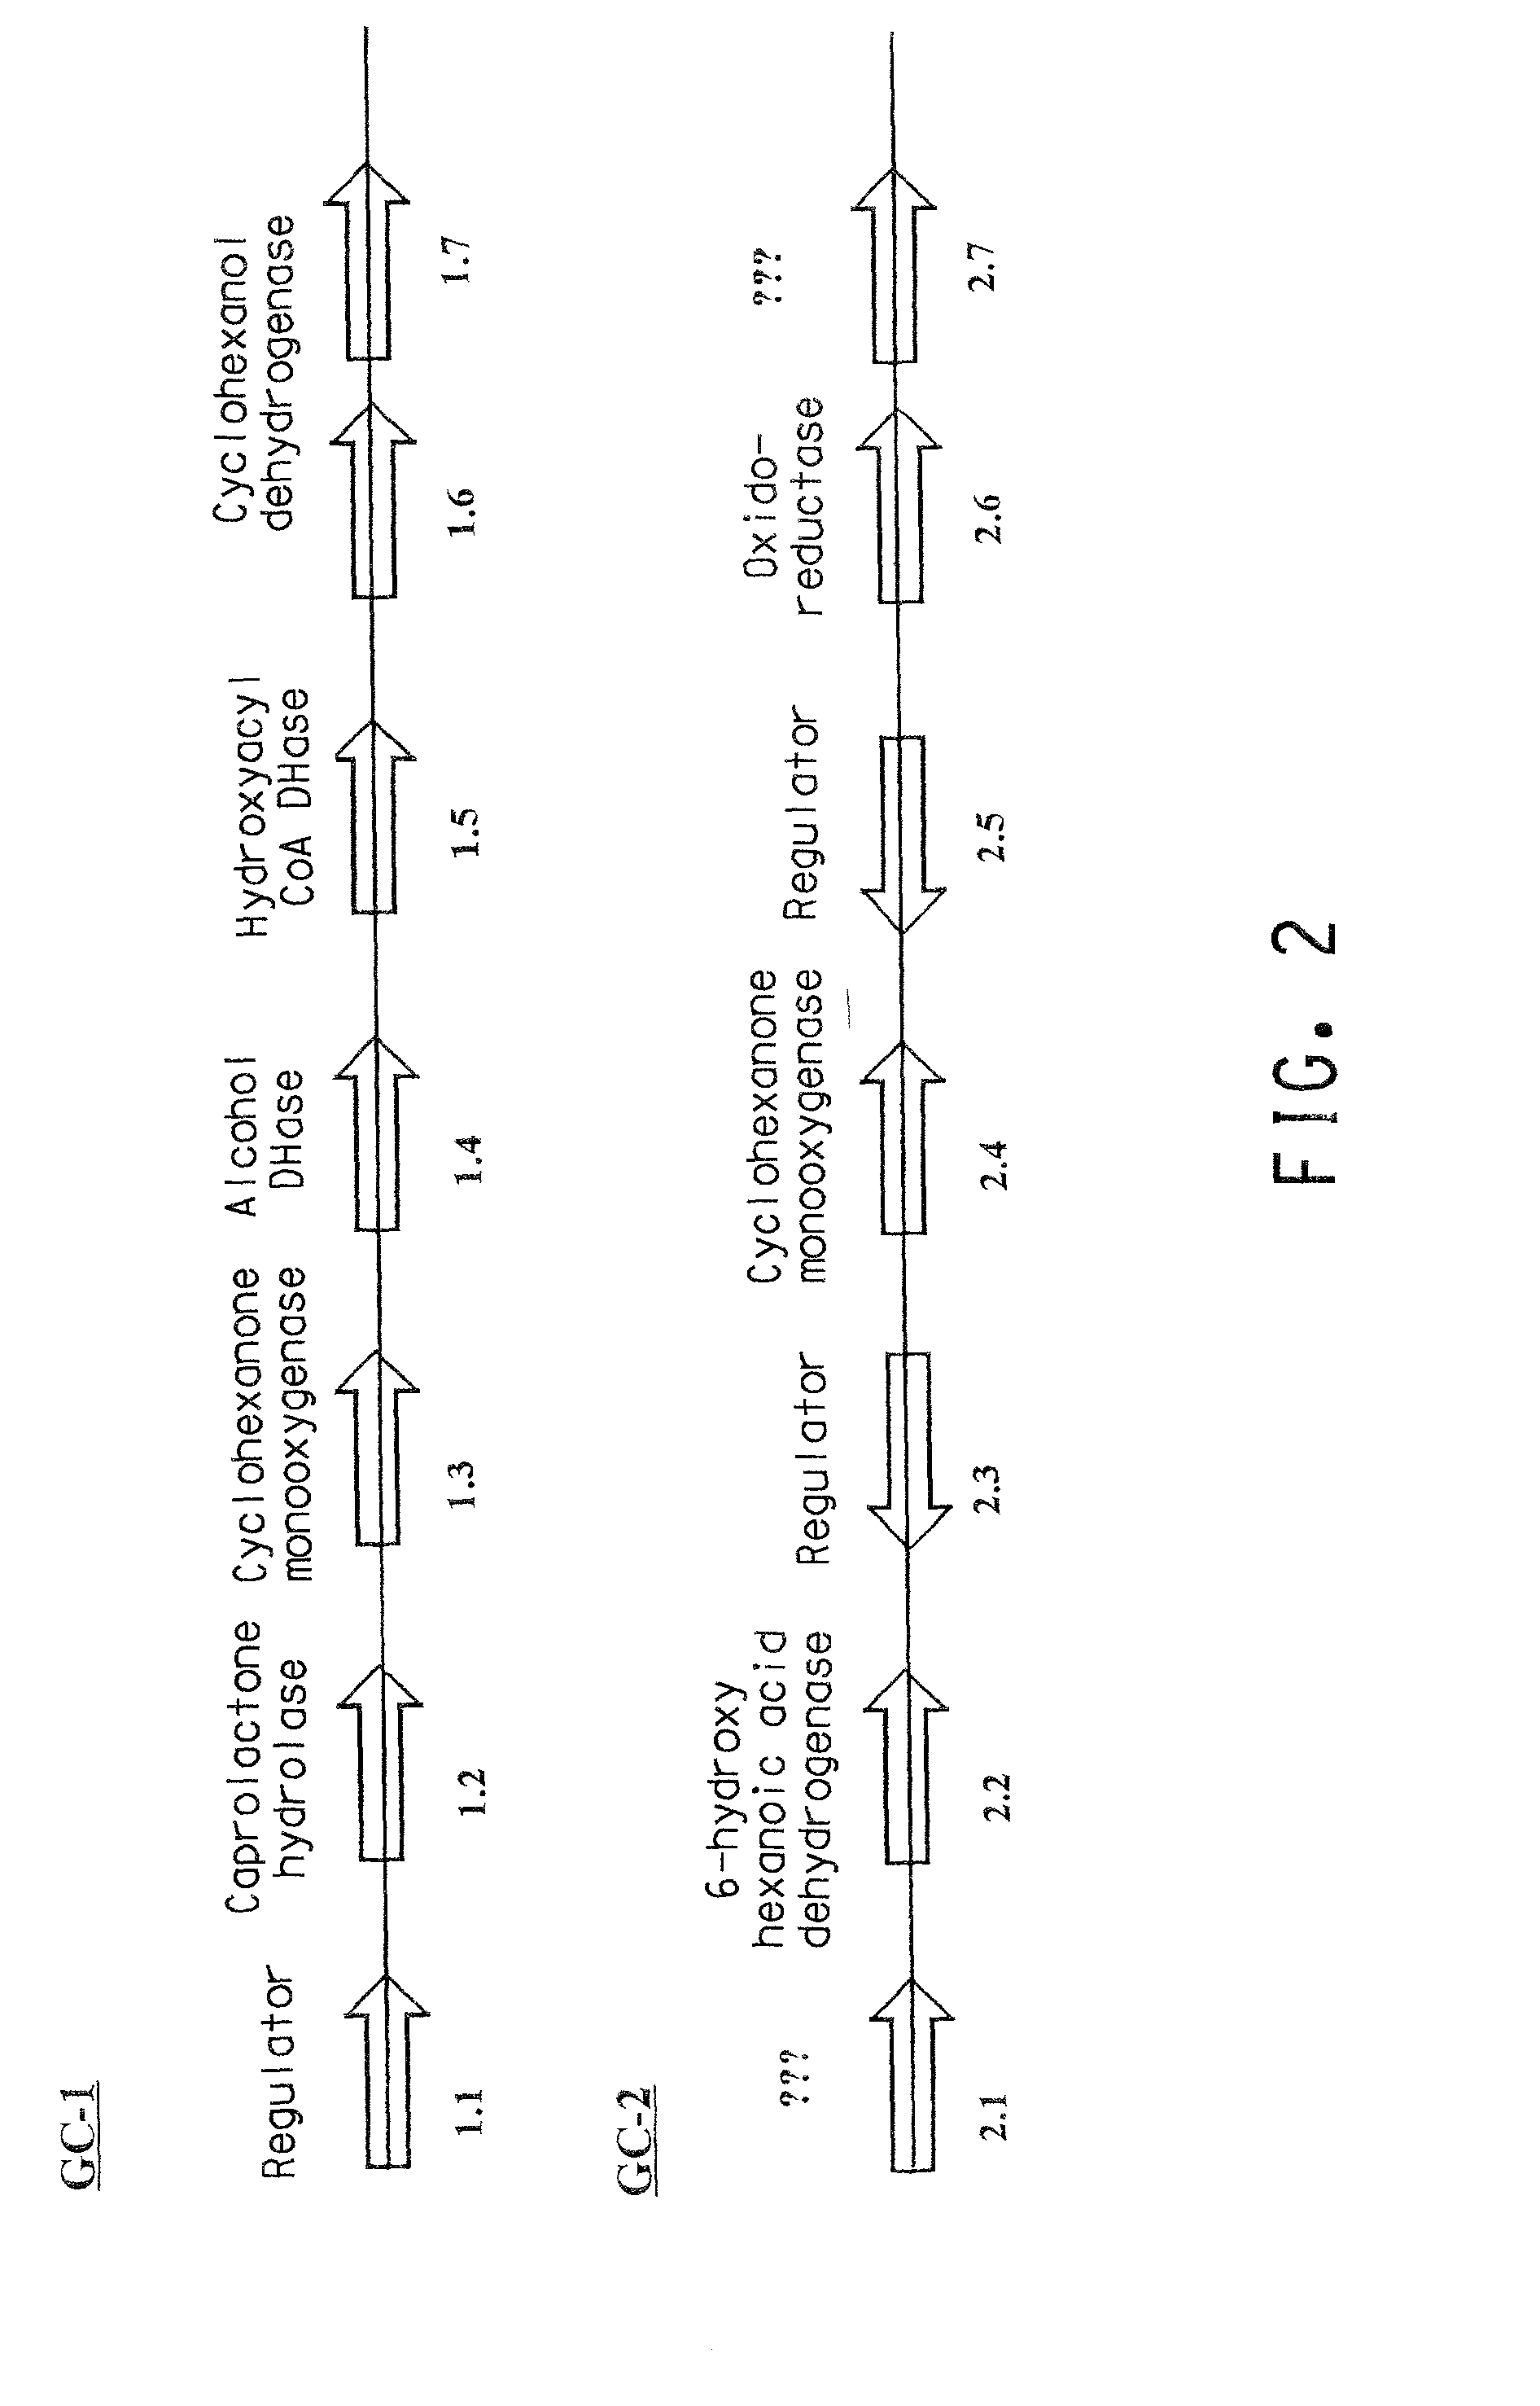 Genes and enzymes for the production of adipic acid intermediates